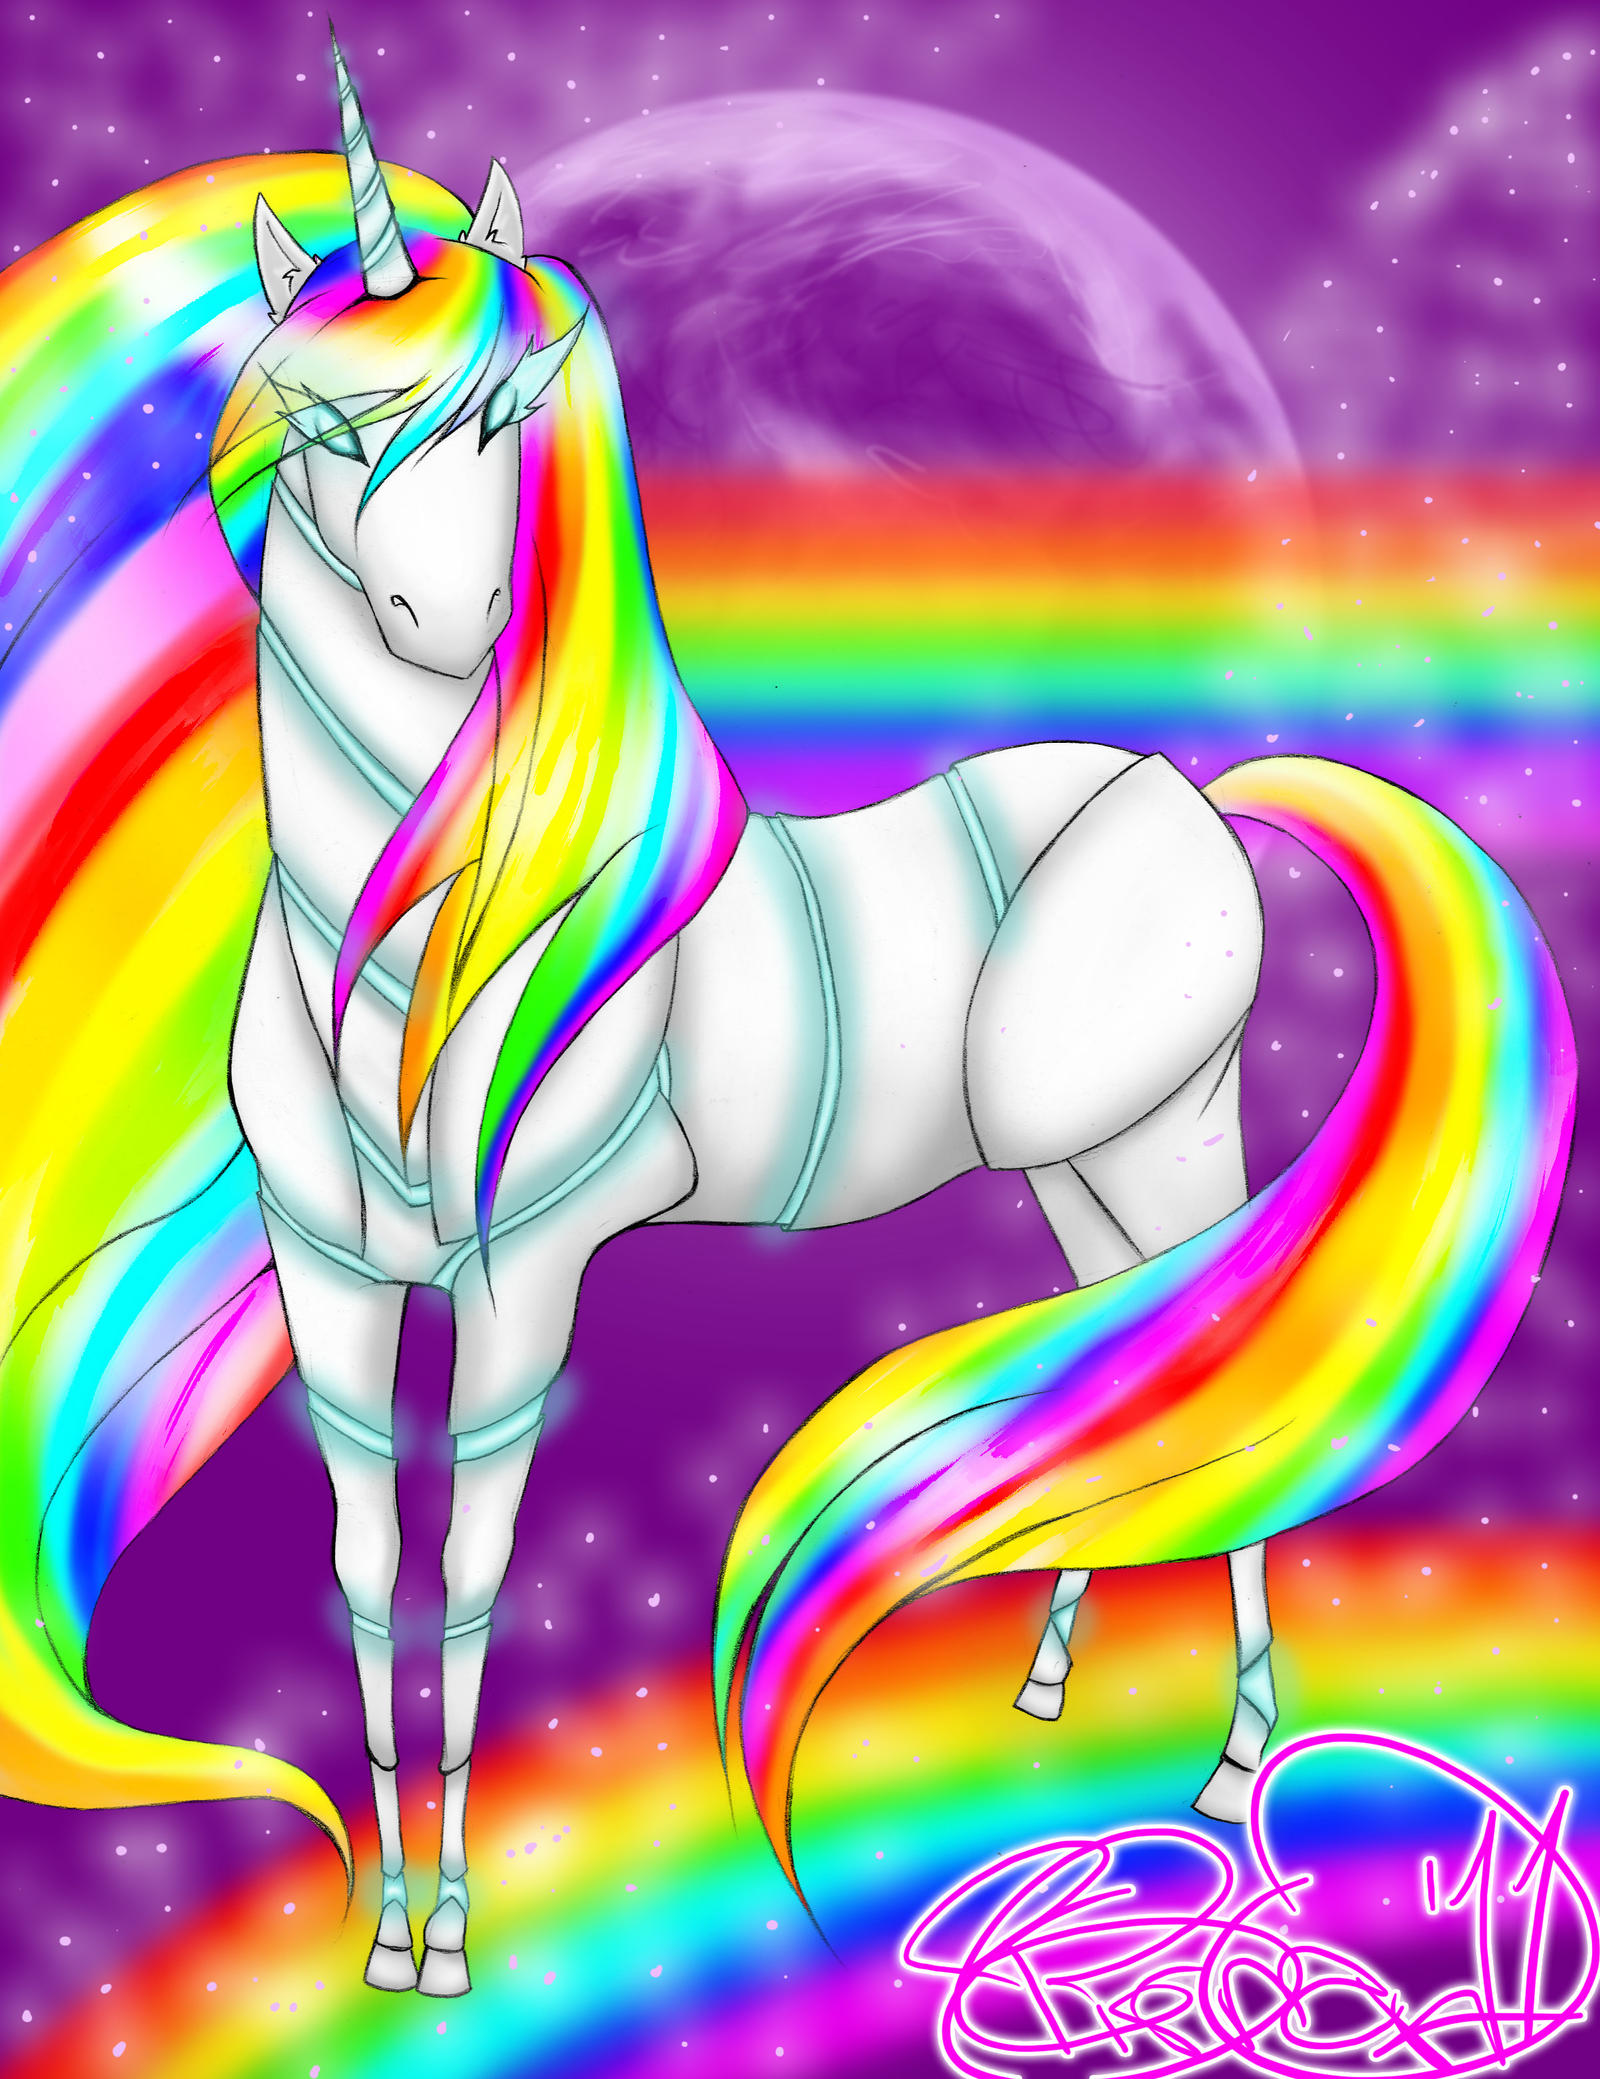 robot_unicorn_attack___colored_by_zimpo-d3fw5tj.jpg